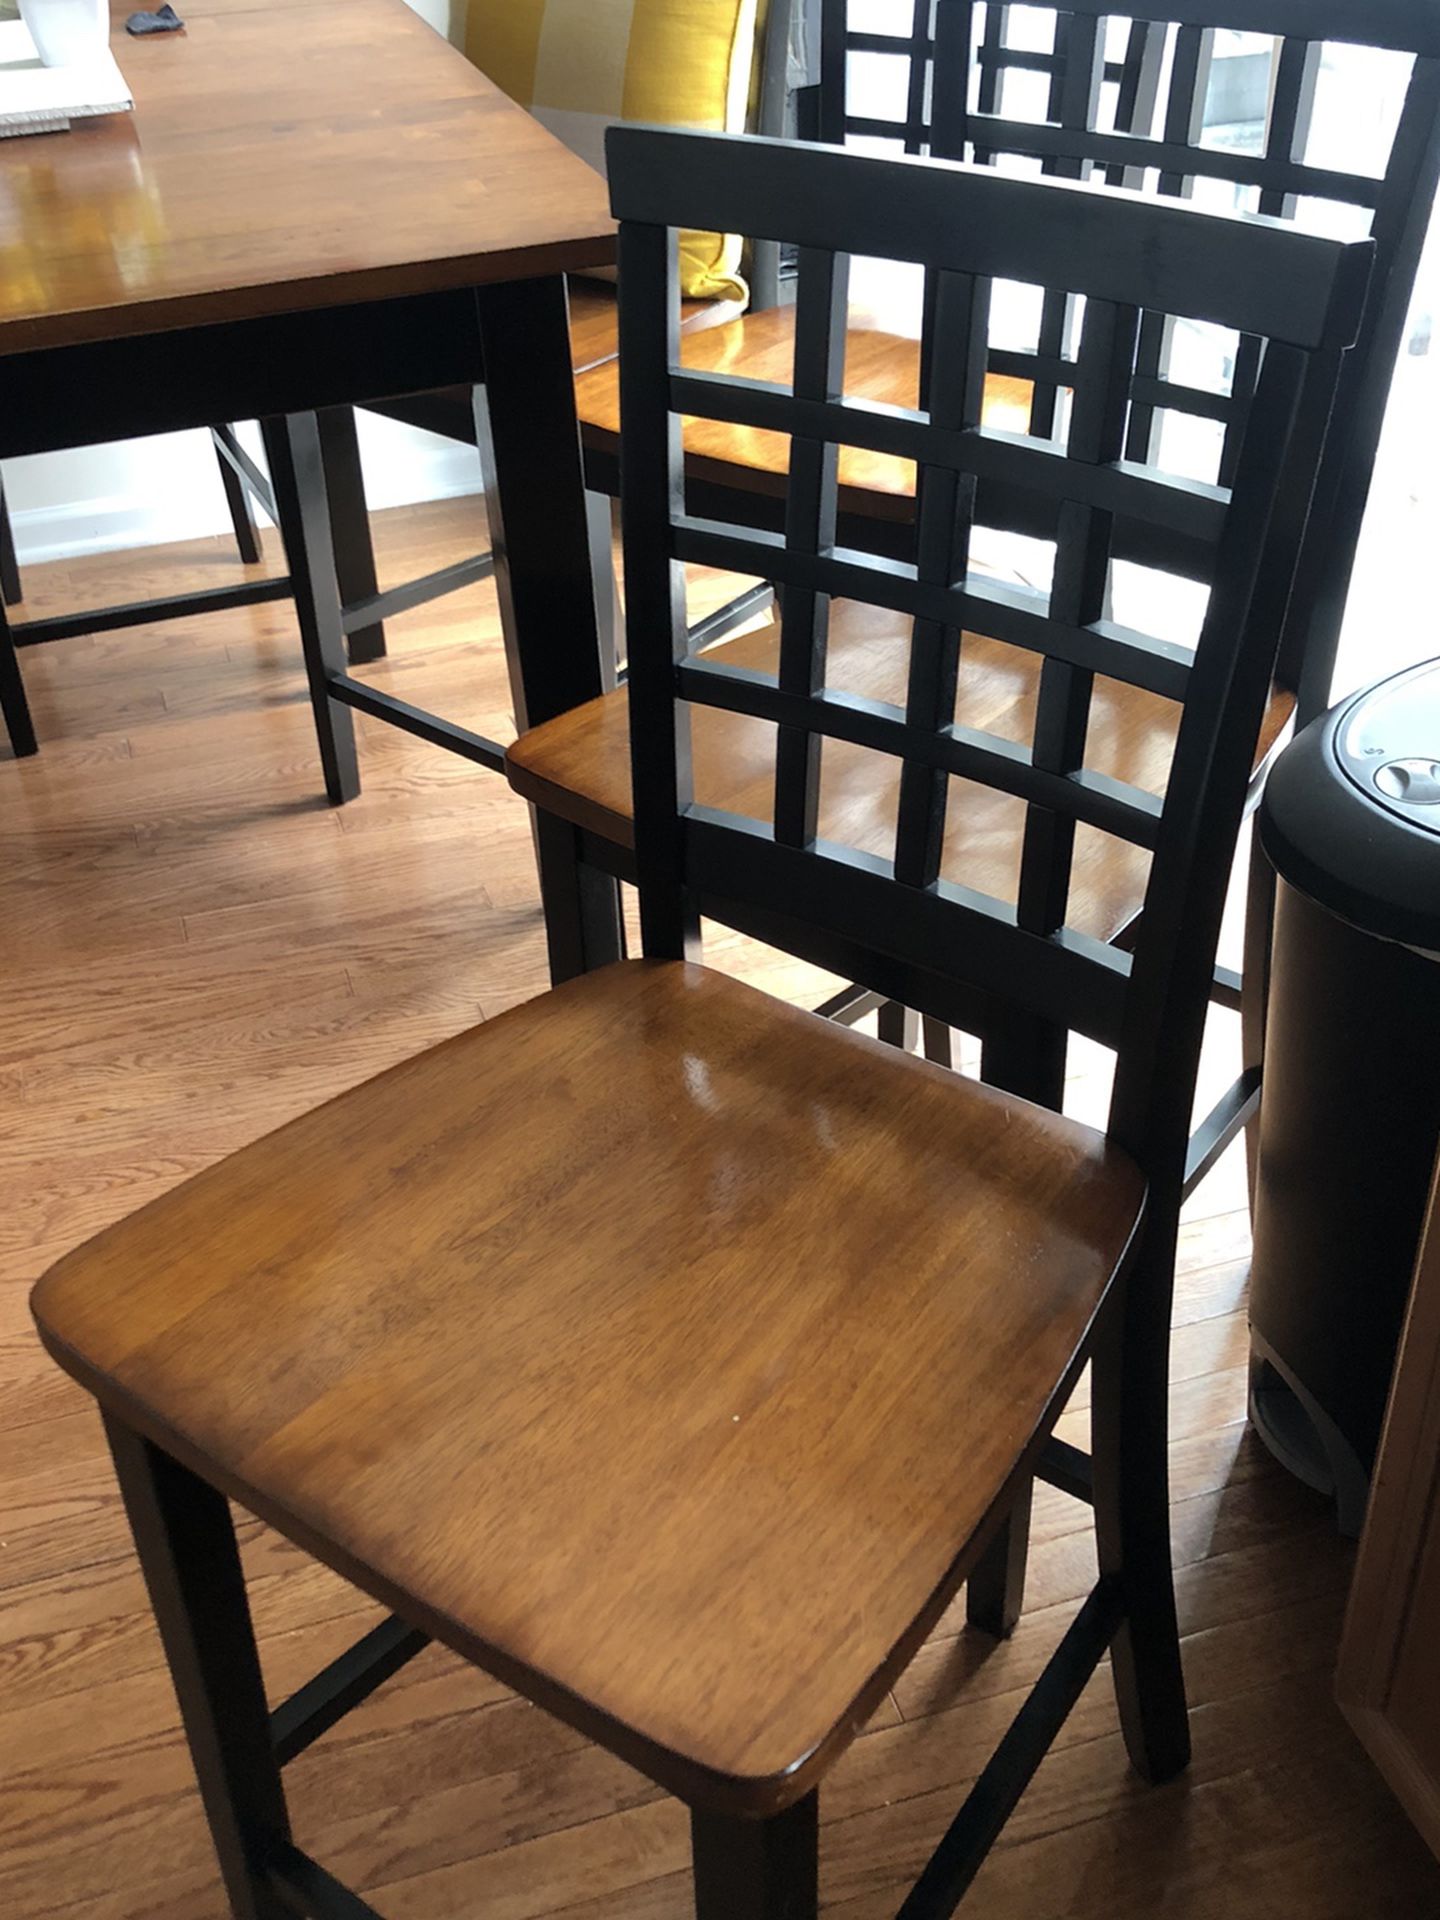 2Black Chestnut Brown Wooden Chairs Counter Height